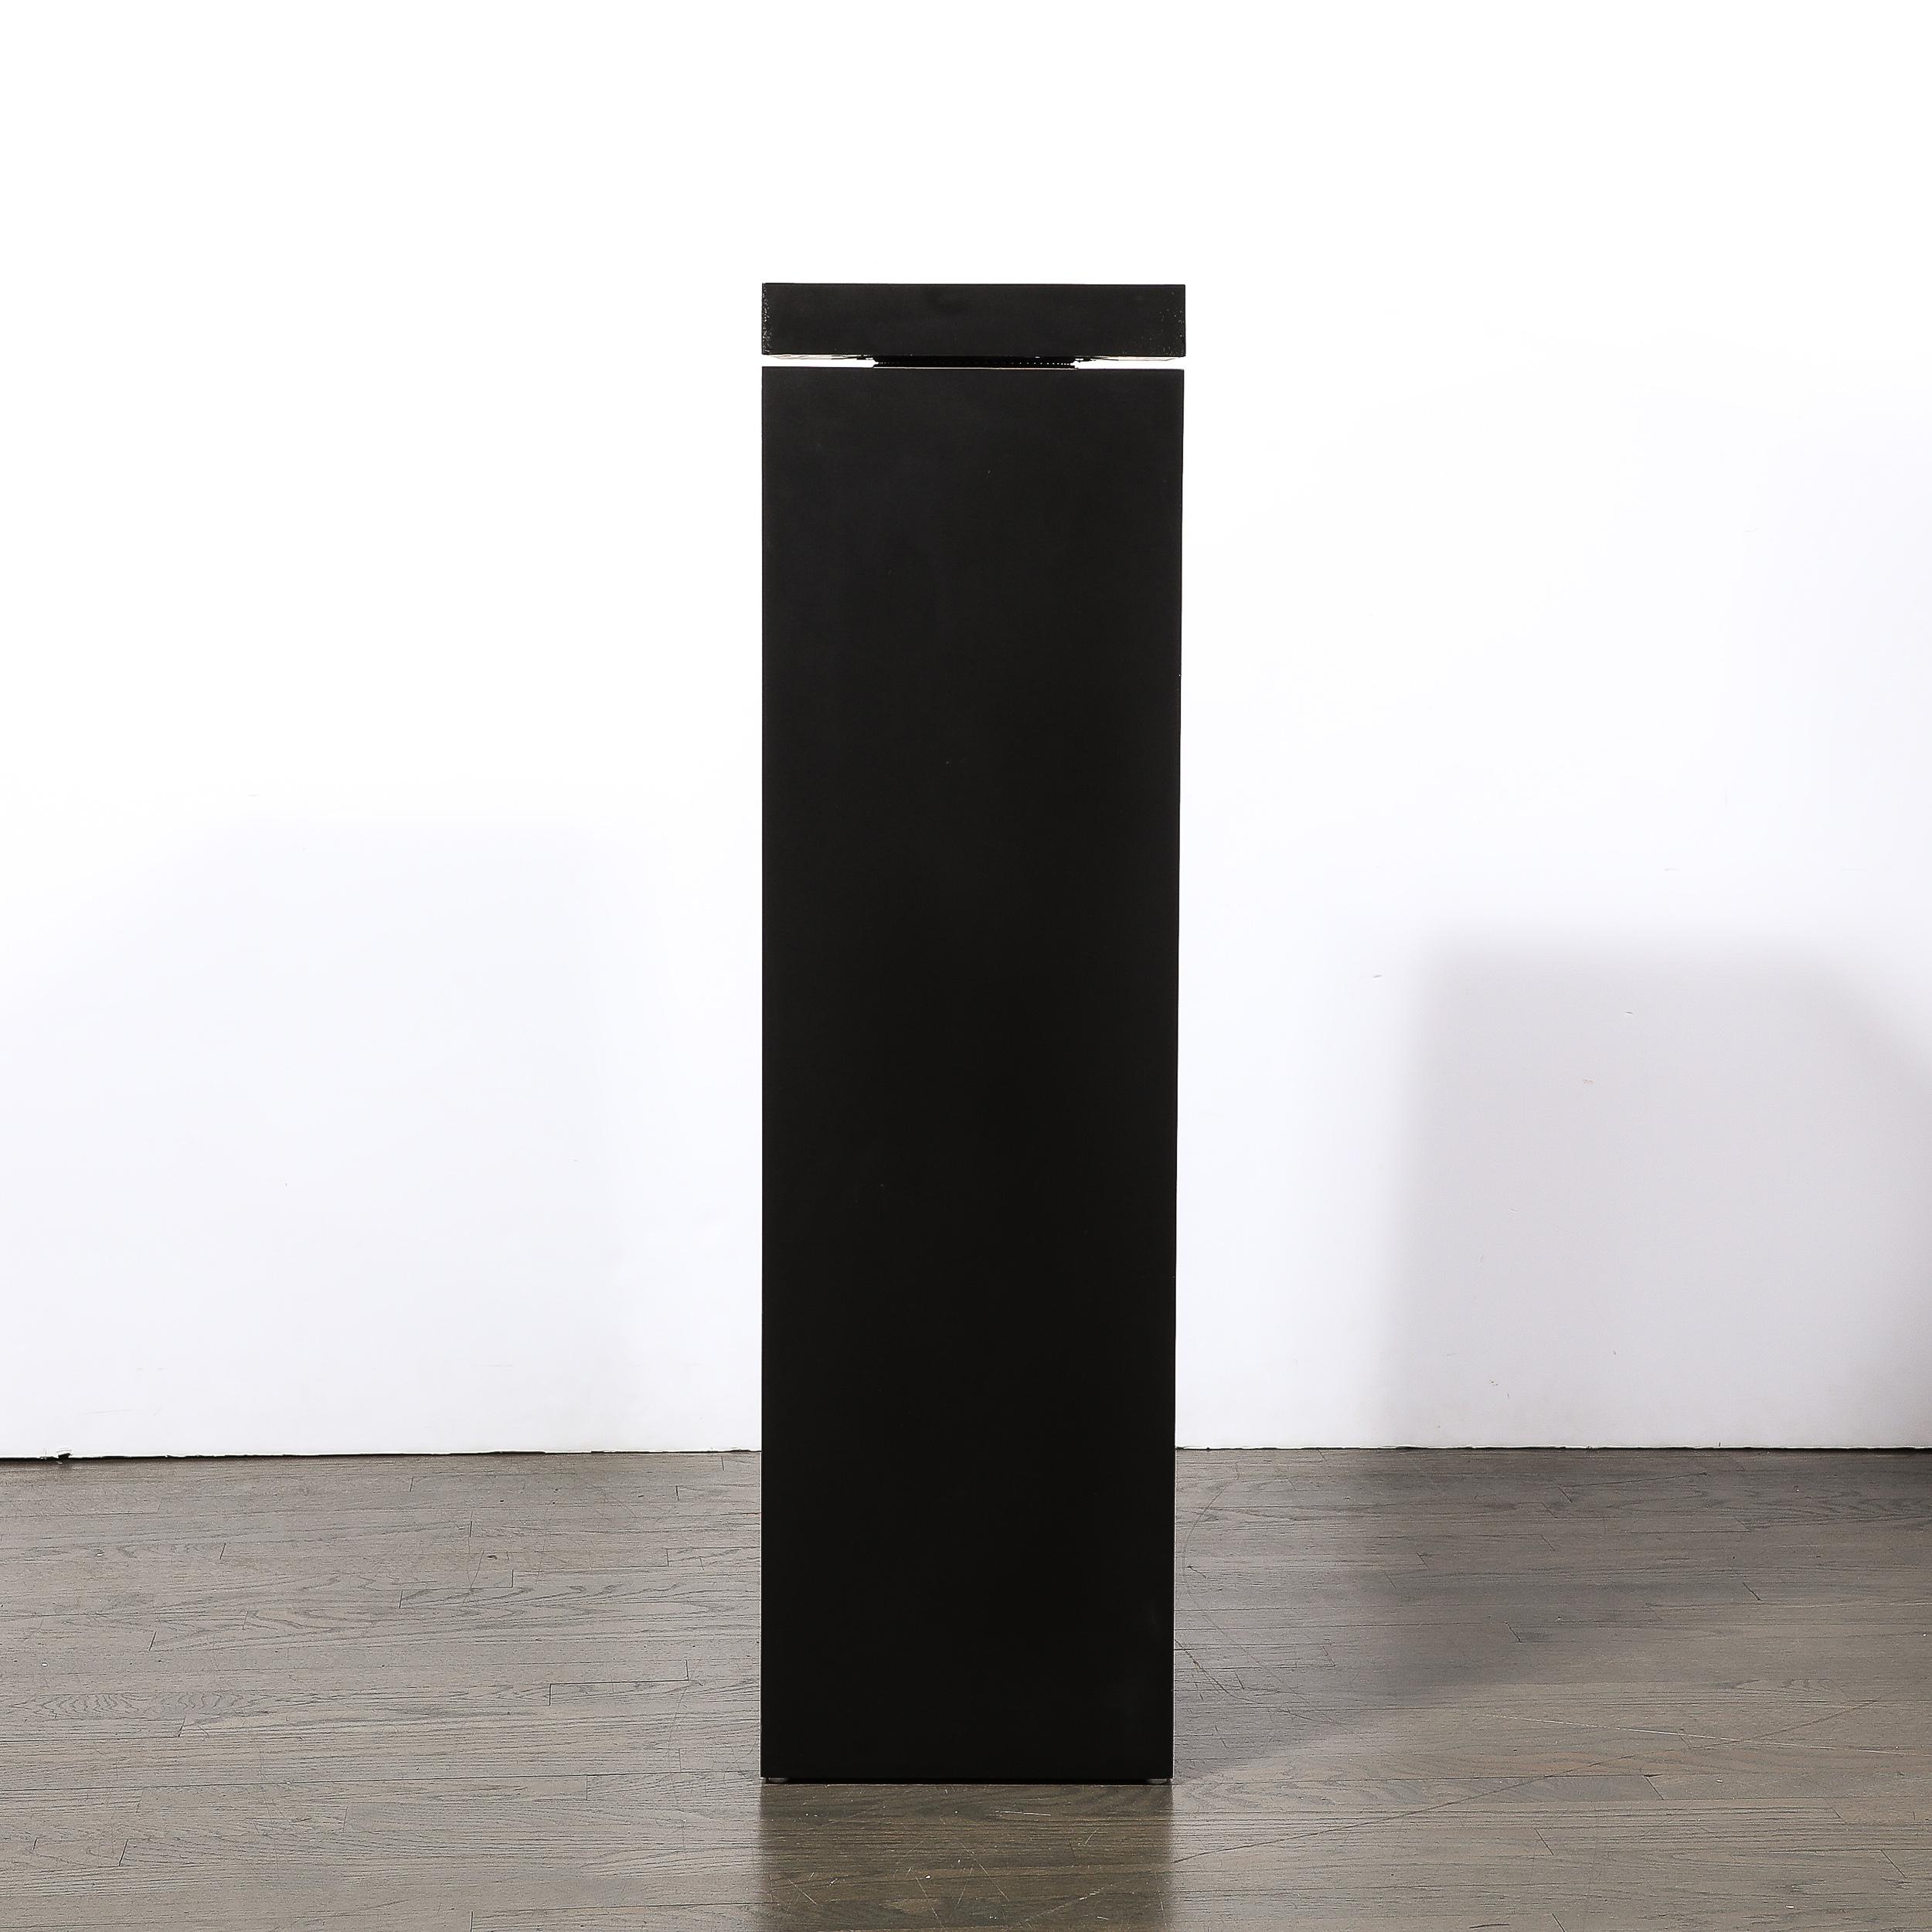 This minimal an highly functional Modernist Rectilinear Matt Black Swivel Top Pedestal Originates from the United States during the latter half of the 20th Century.  Features a minimal geometric form with a lovely proportioned divide between the